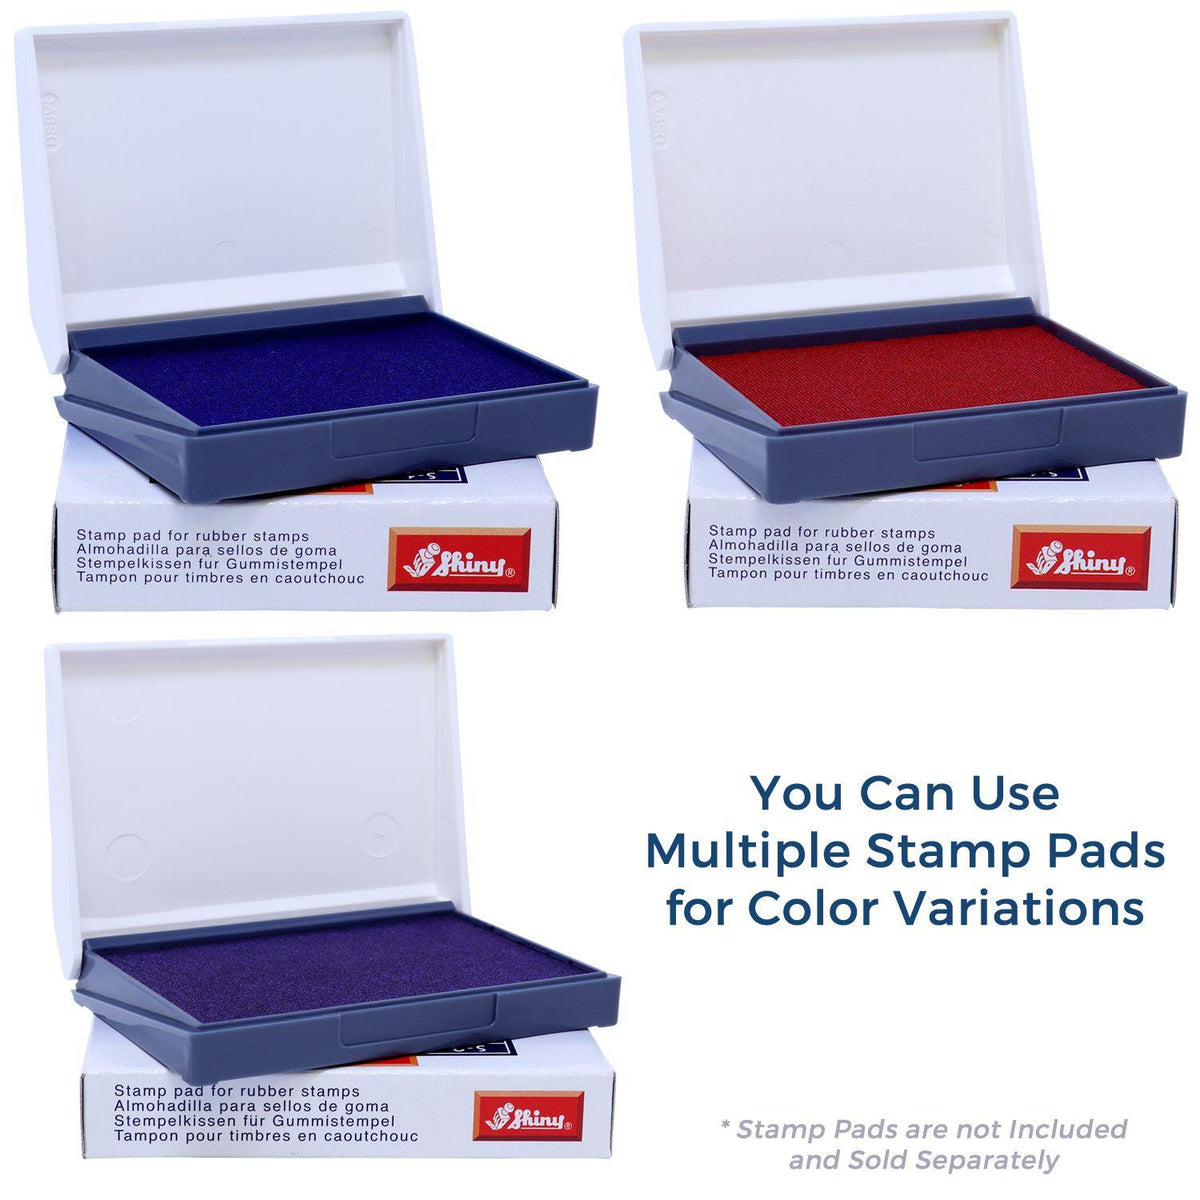 Stamp Pads for Large Narrow Void Rubber Stamp Available